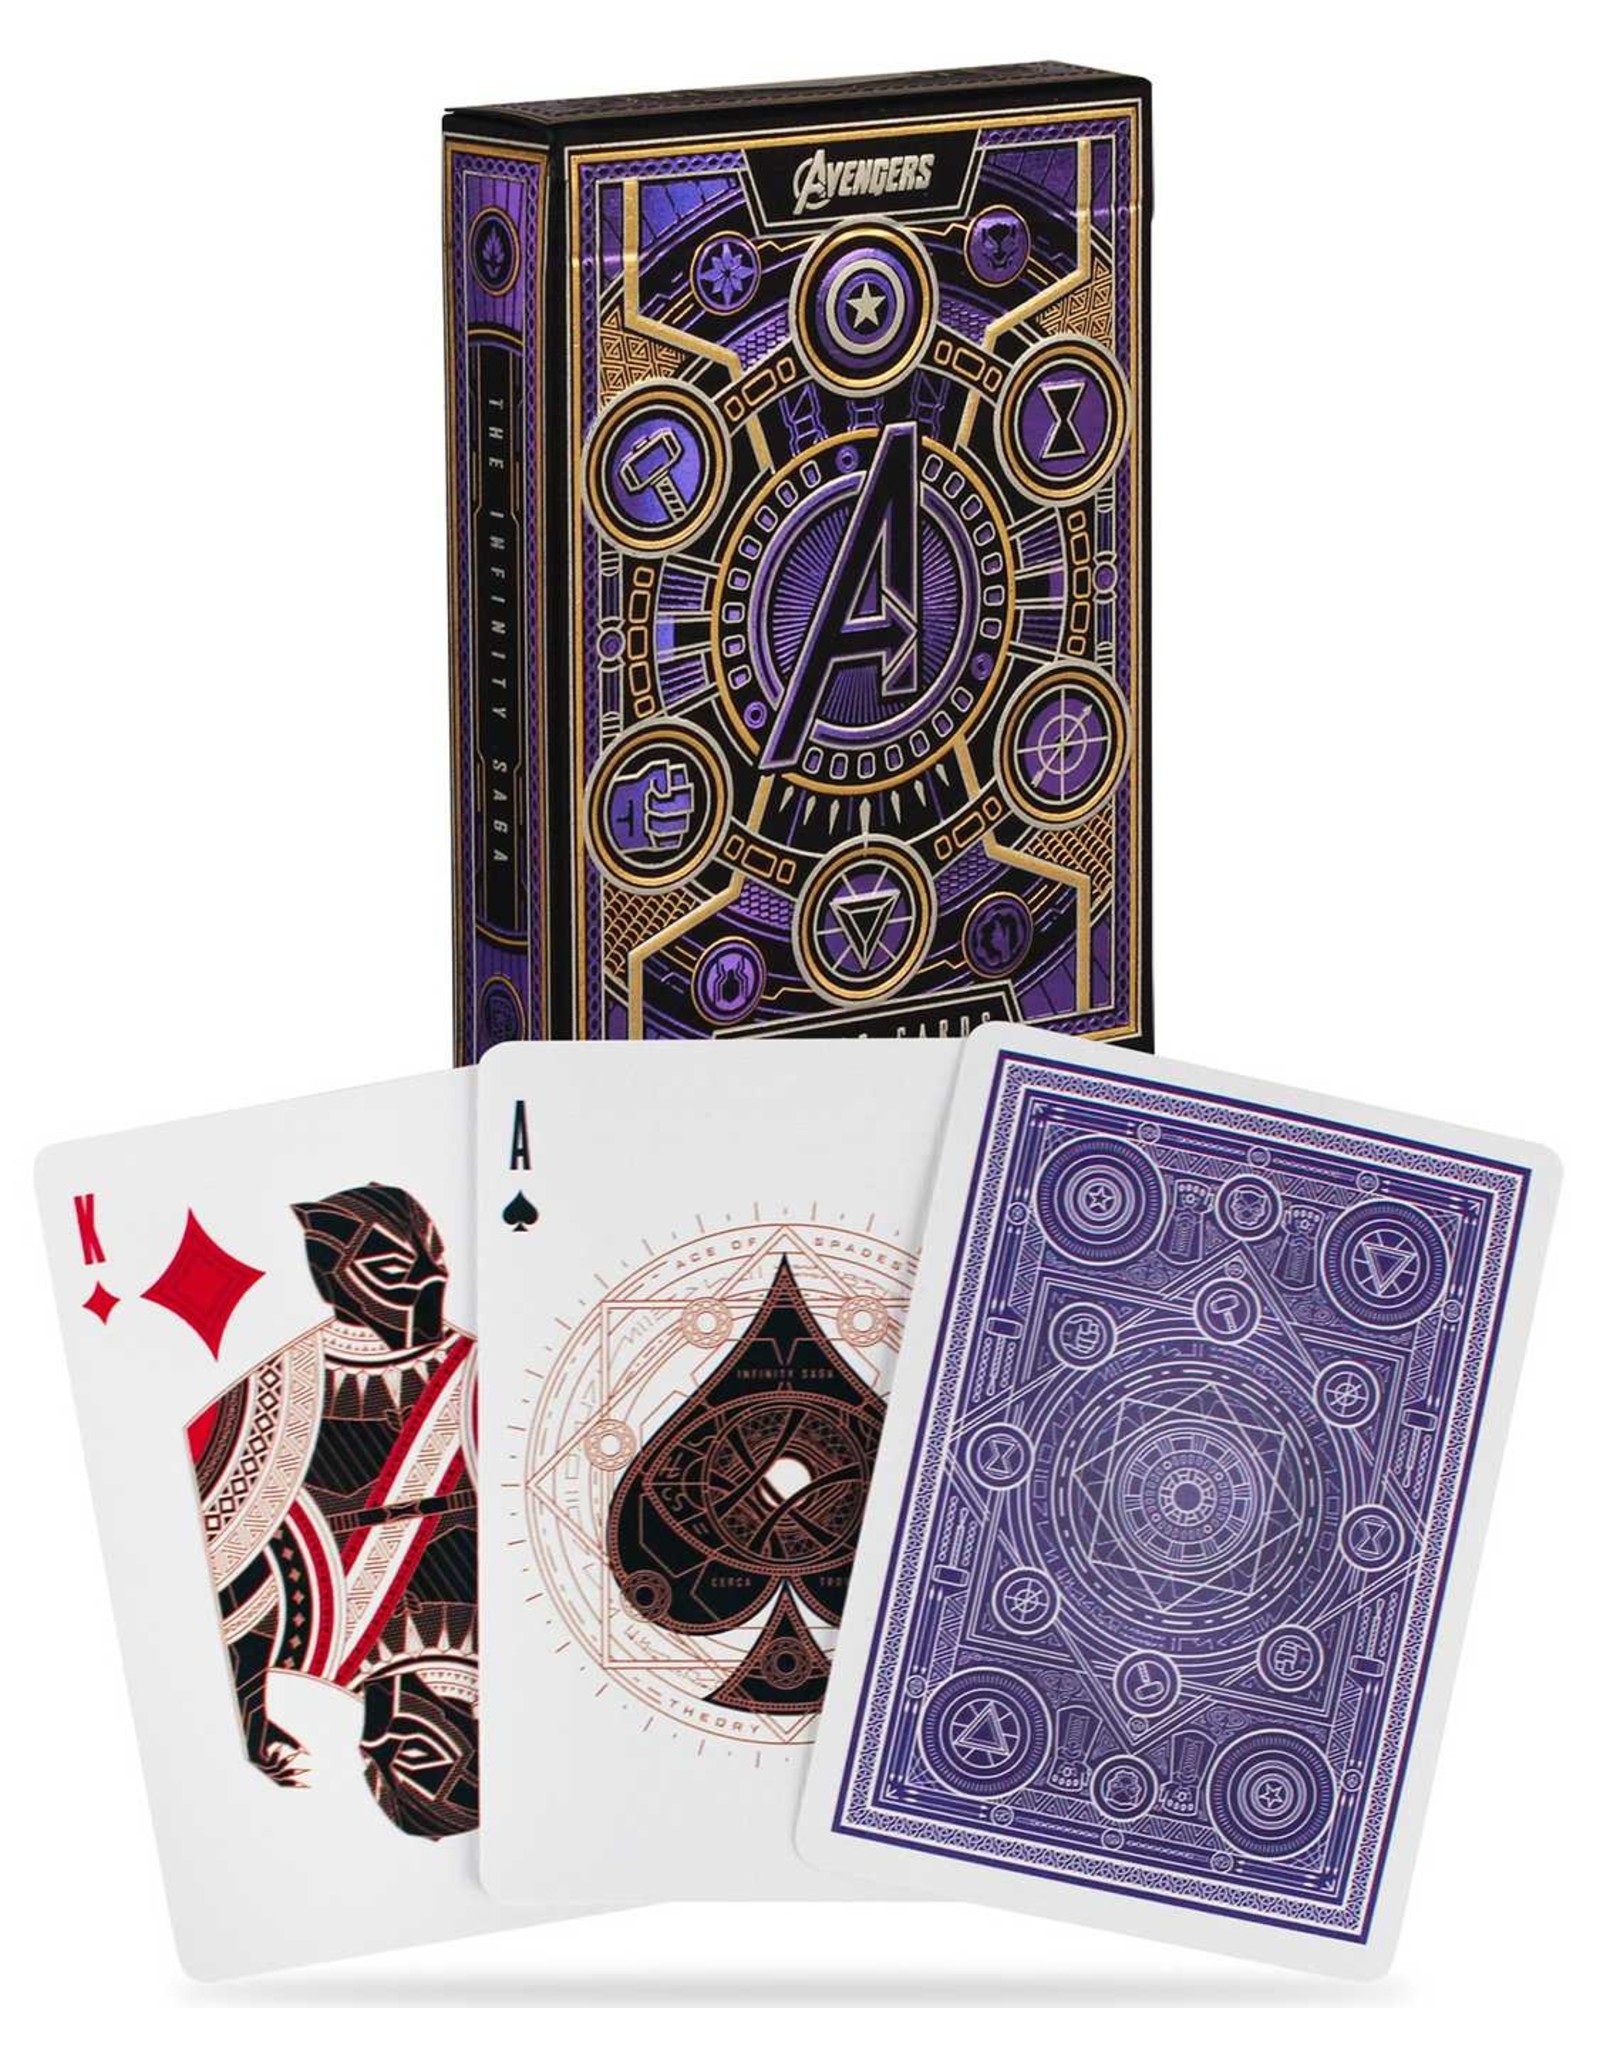 Poker Playing Cards - Avengers